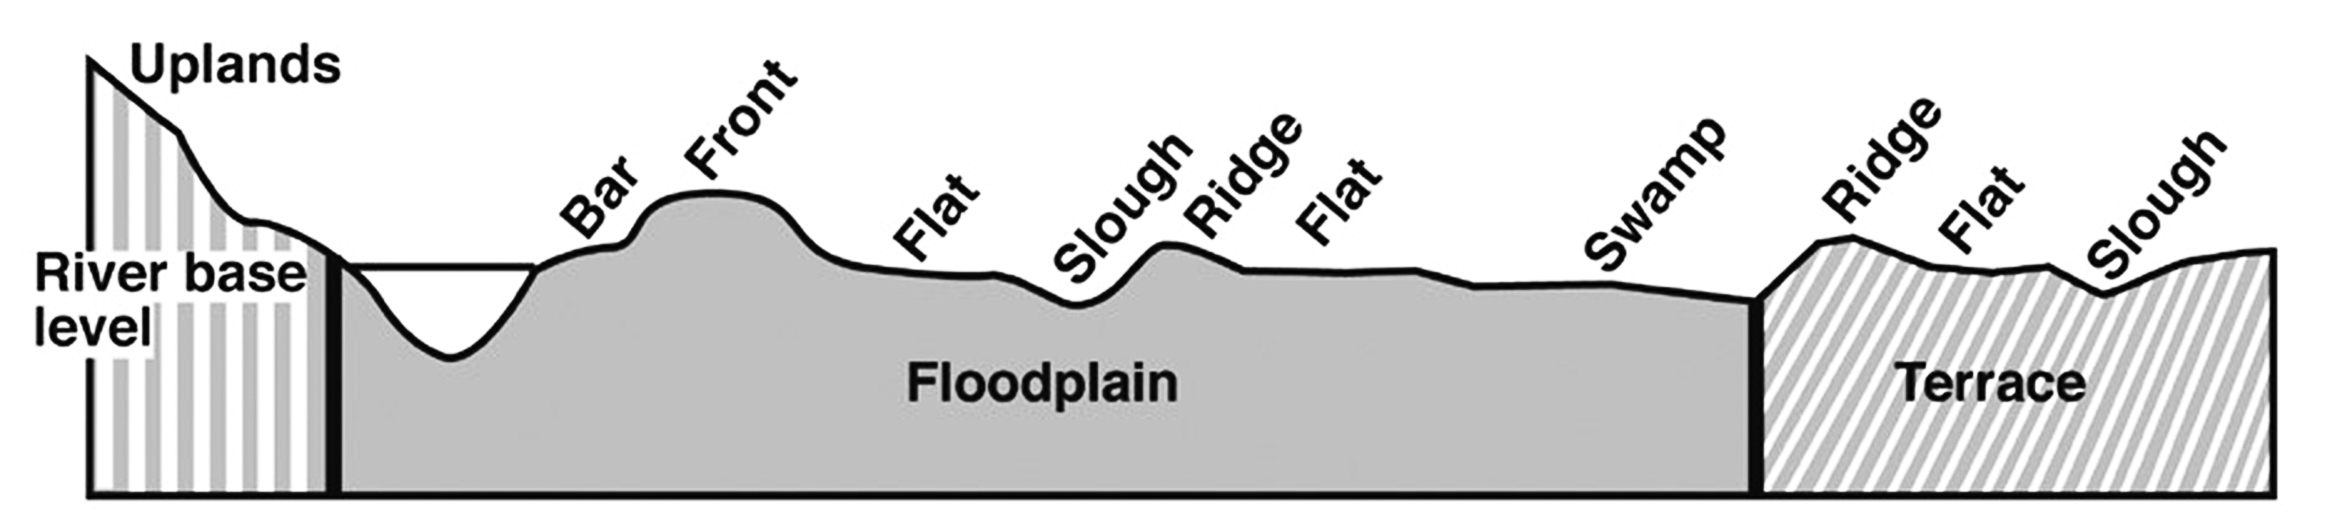 Diagram showing topography of a floodplain.